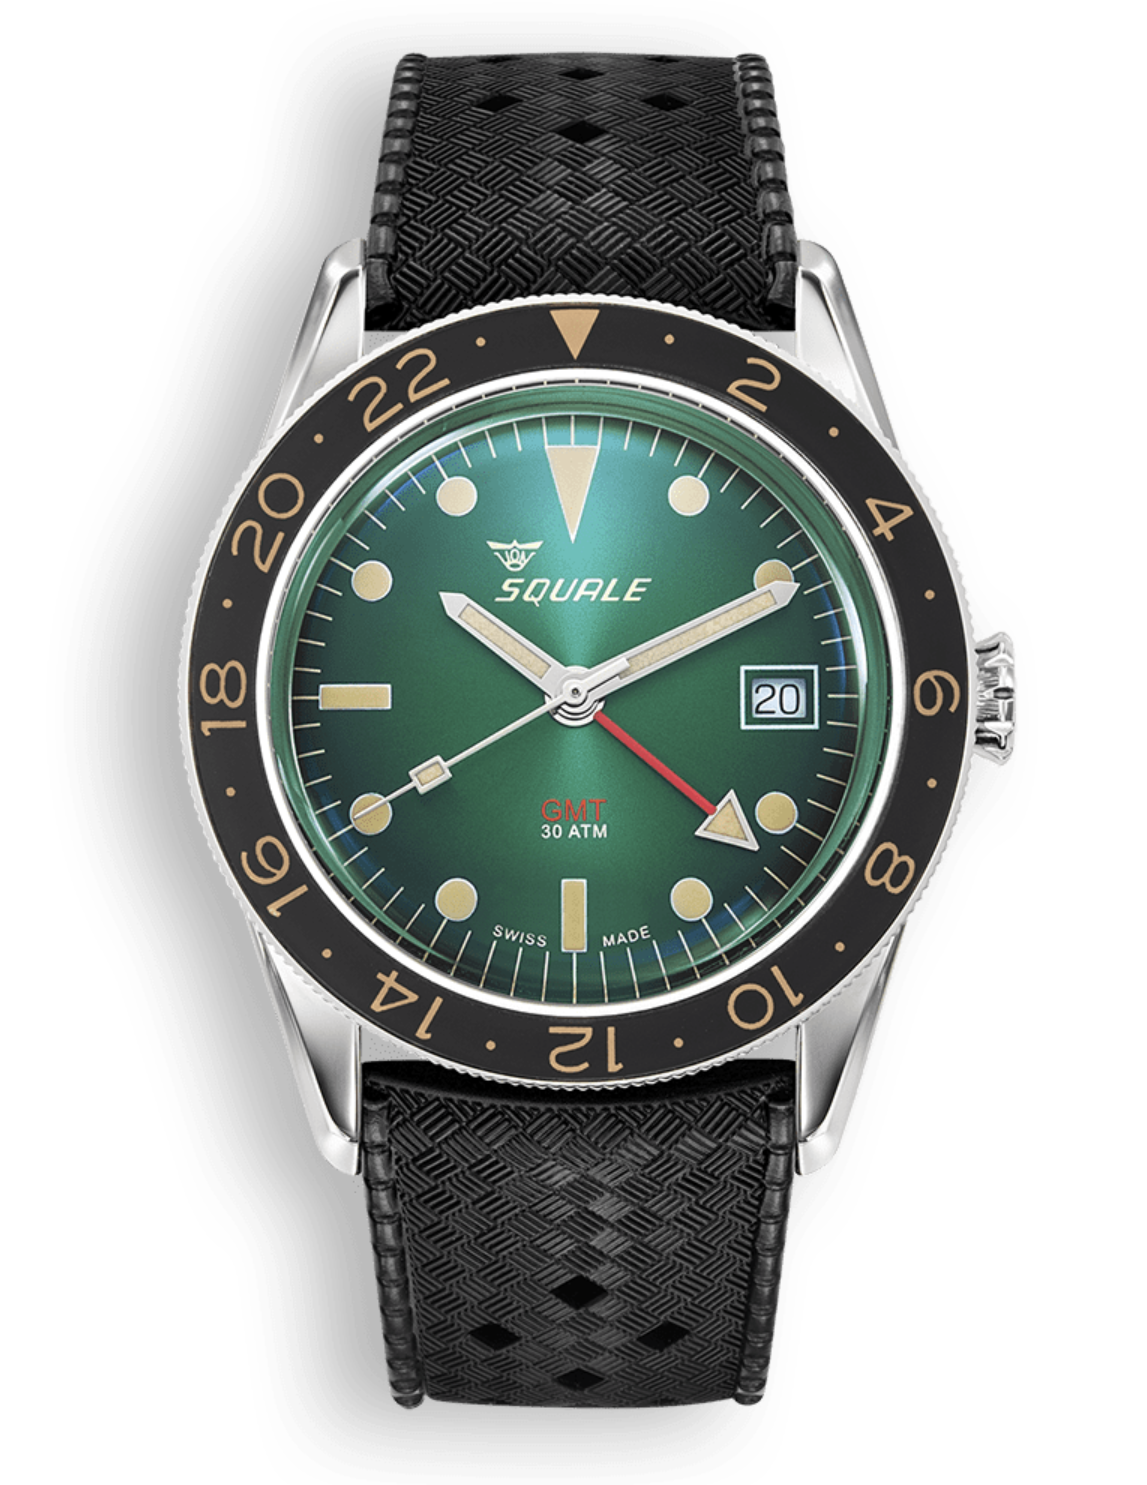 SQUALE SUB-39 GMT VINTAGE GREEN